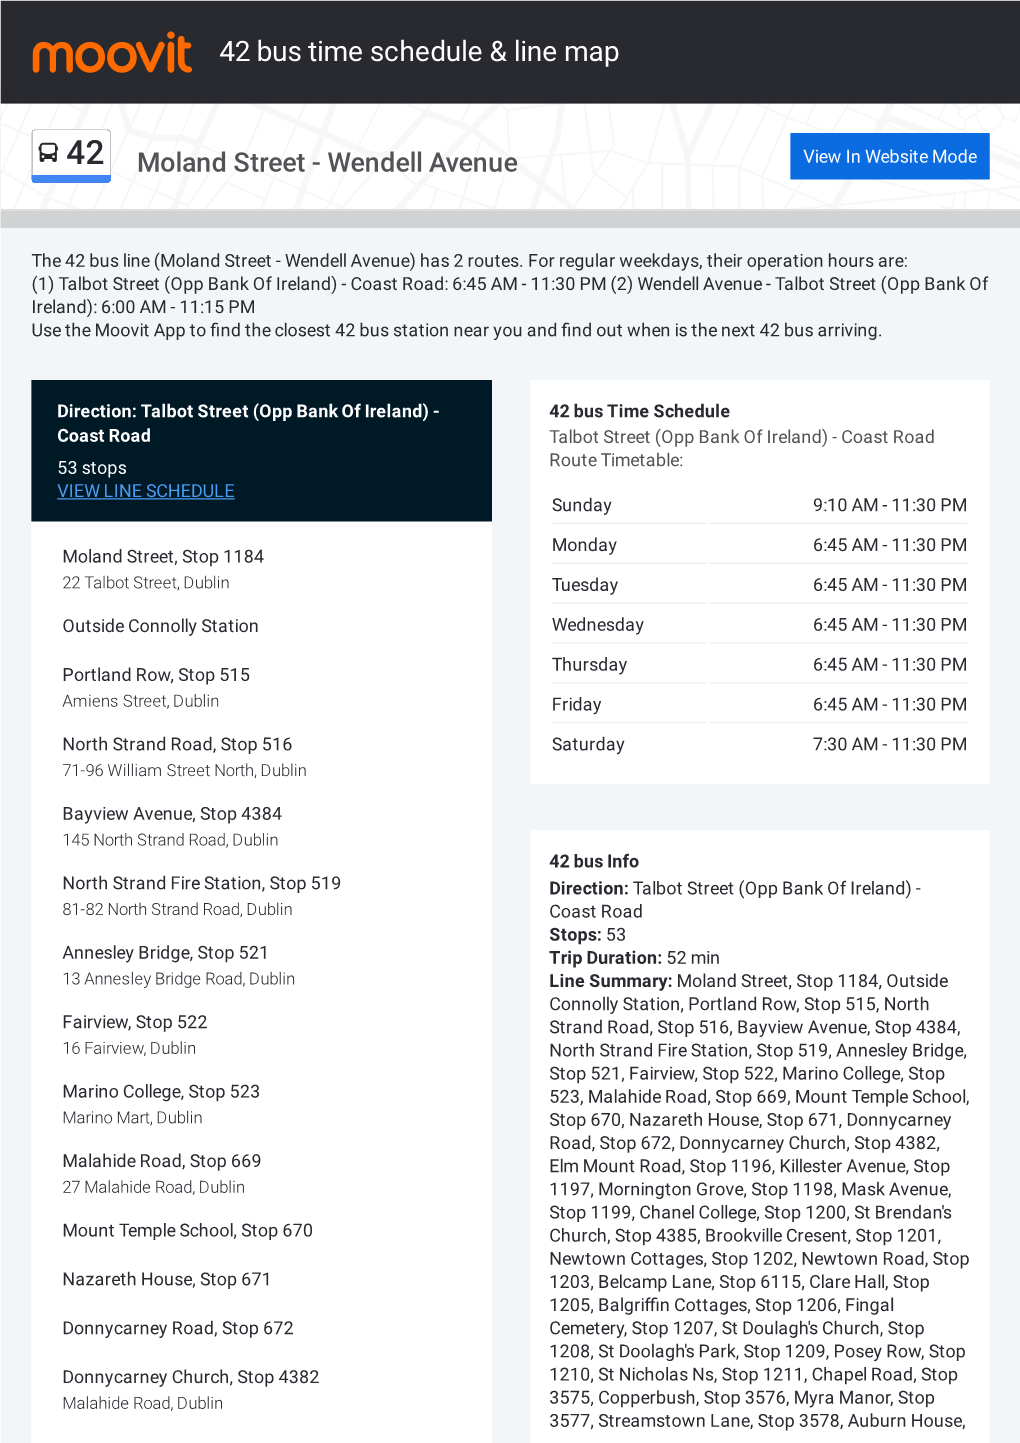 42 Bus Time Schedule & Line Route